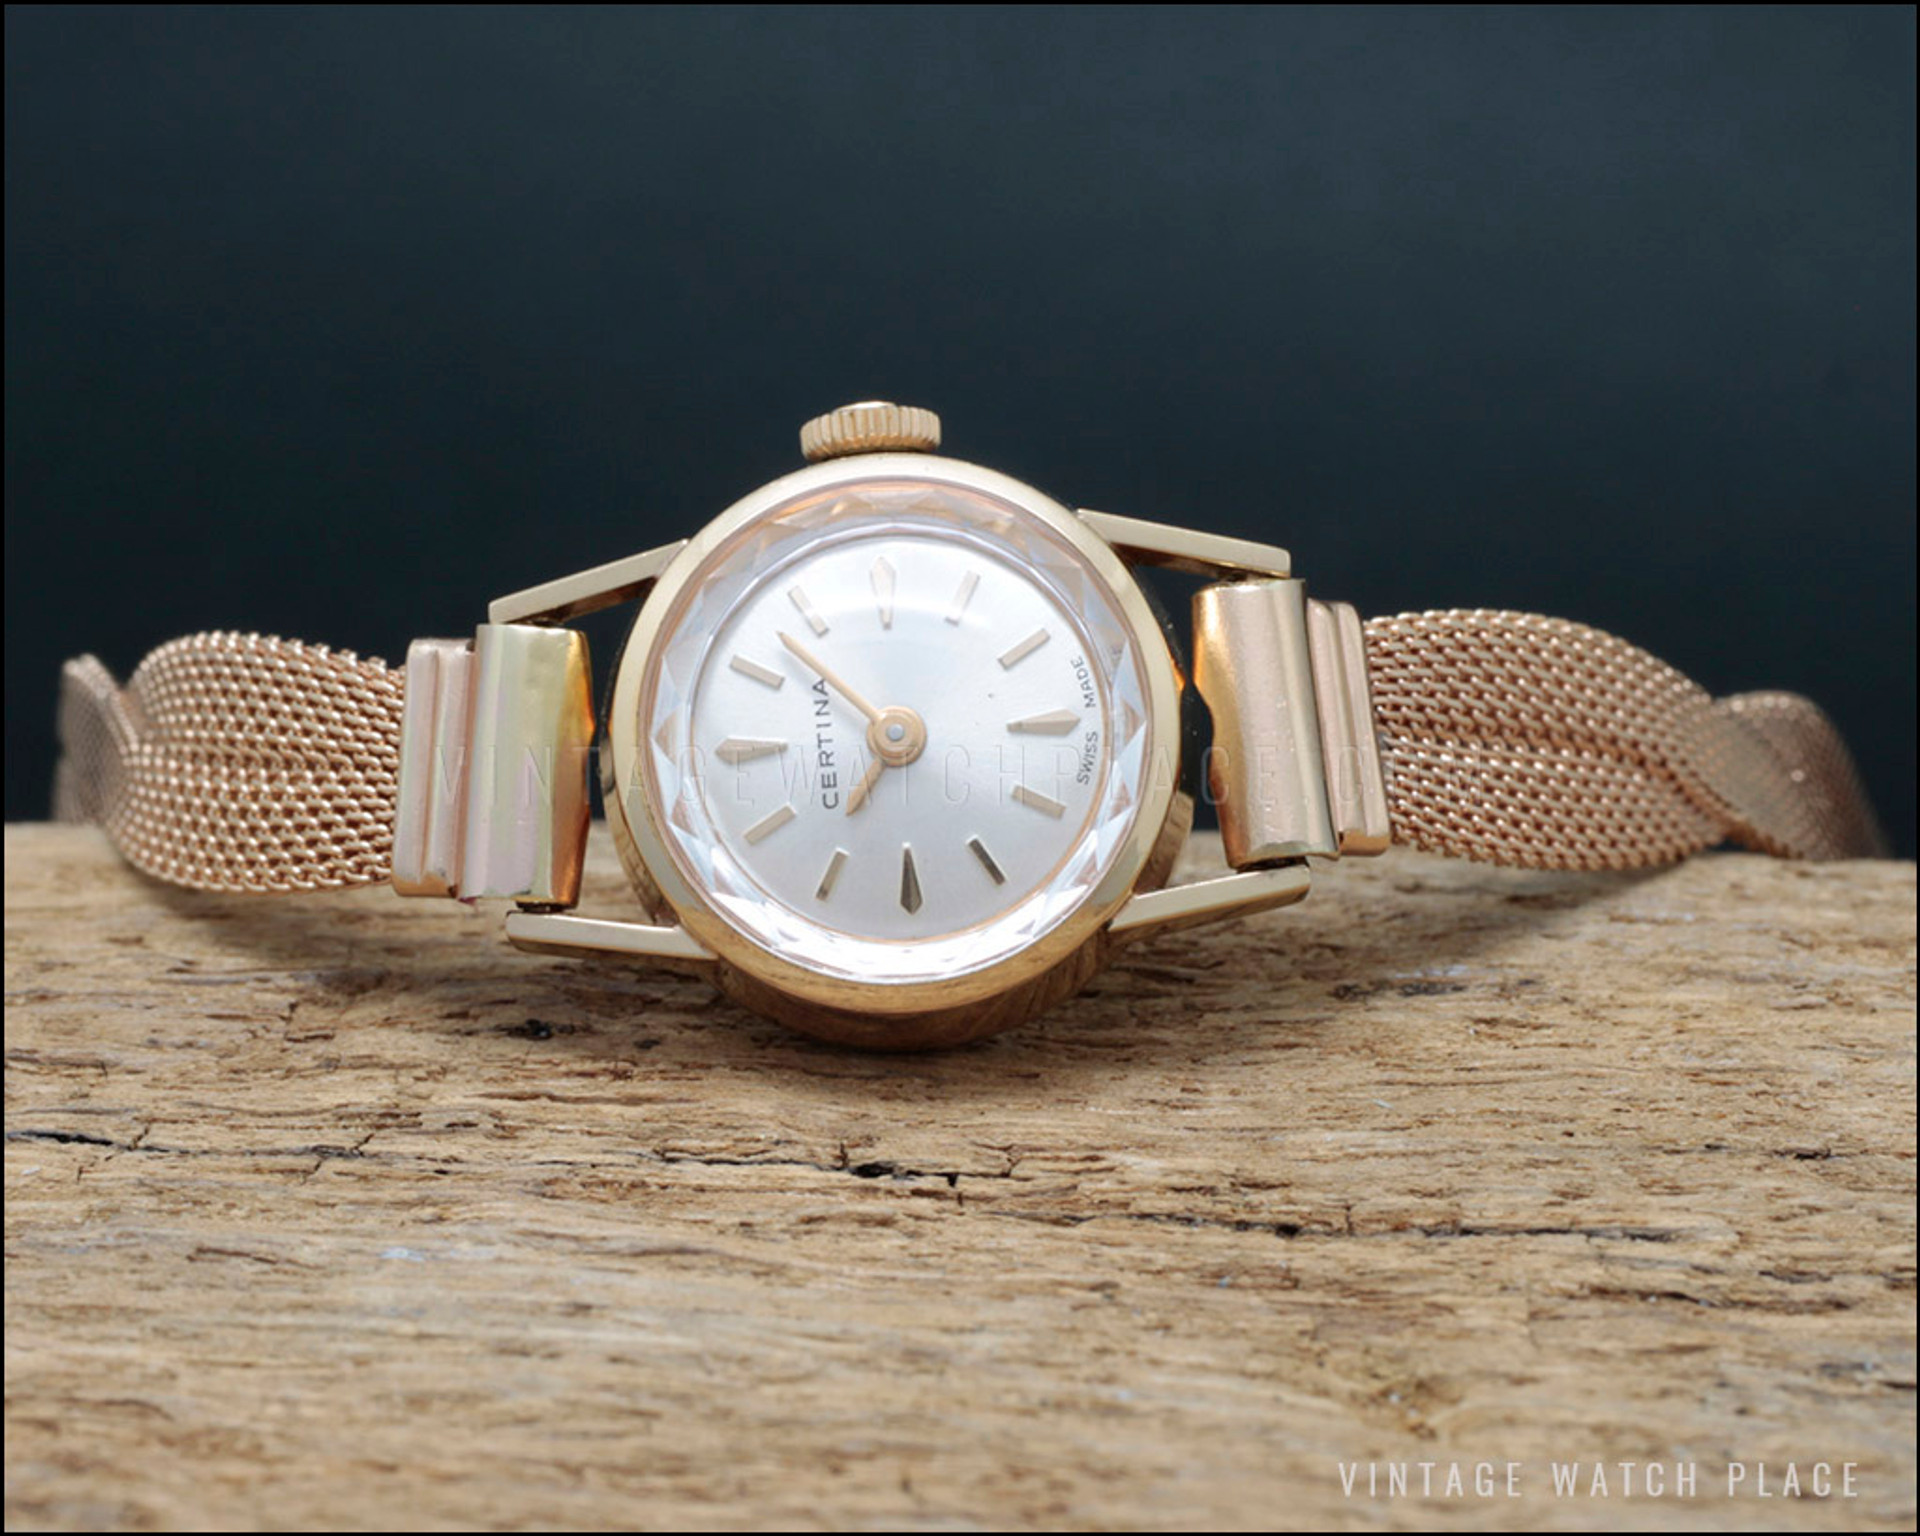 New Old Stock Certina Cocktail mechanical vintage watch, from the 60's ...